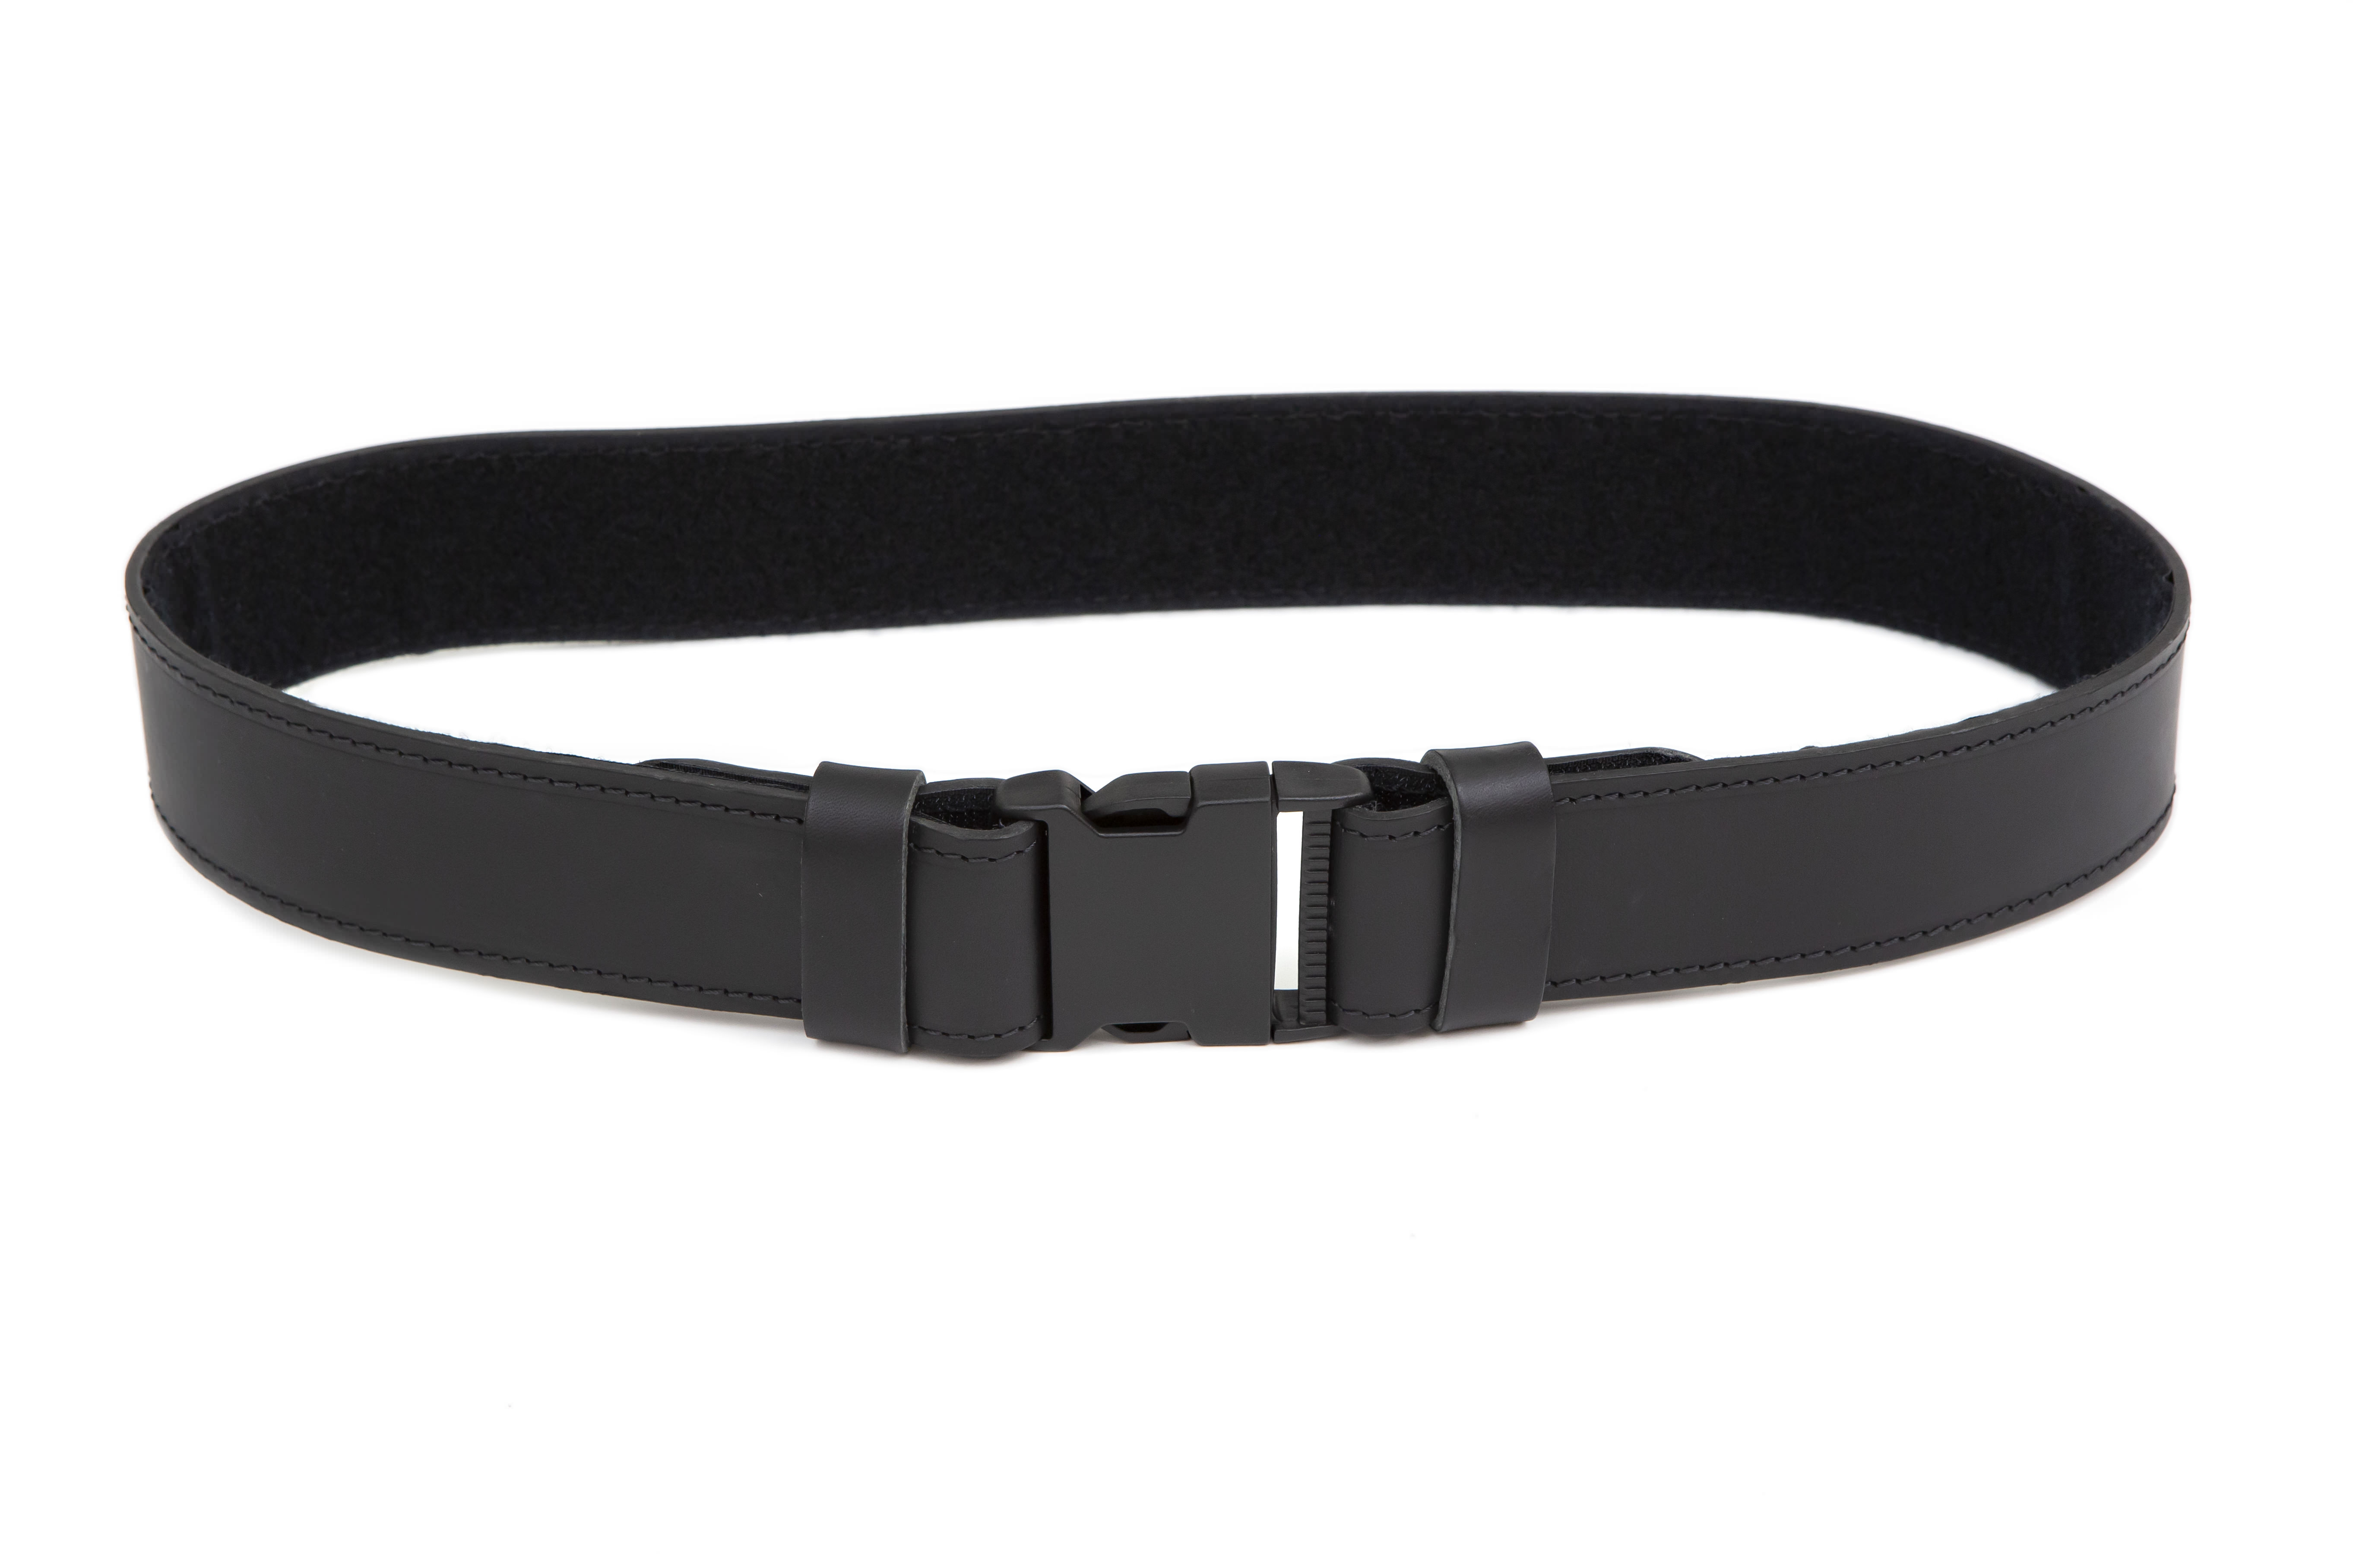 Premium Leather Equipment Duty Belt - Hold Your Essentials in Style